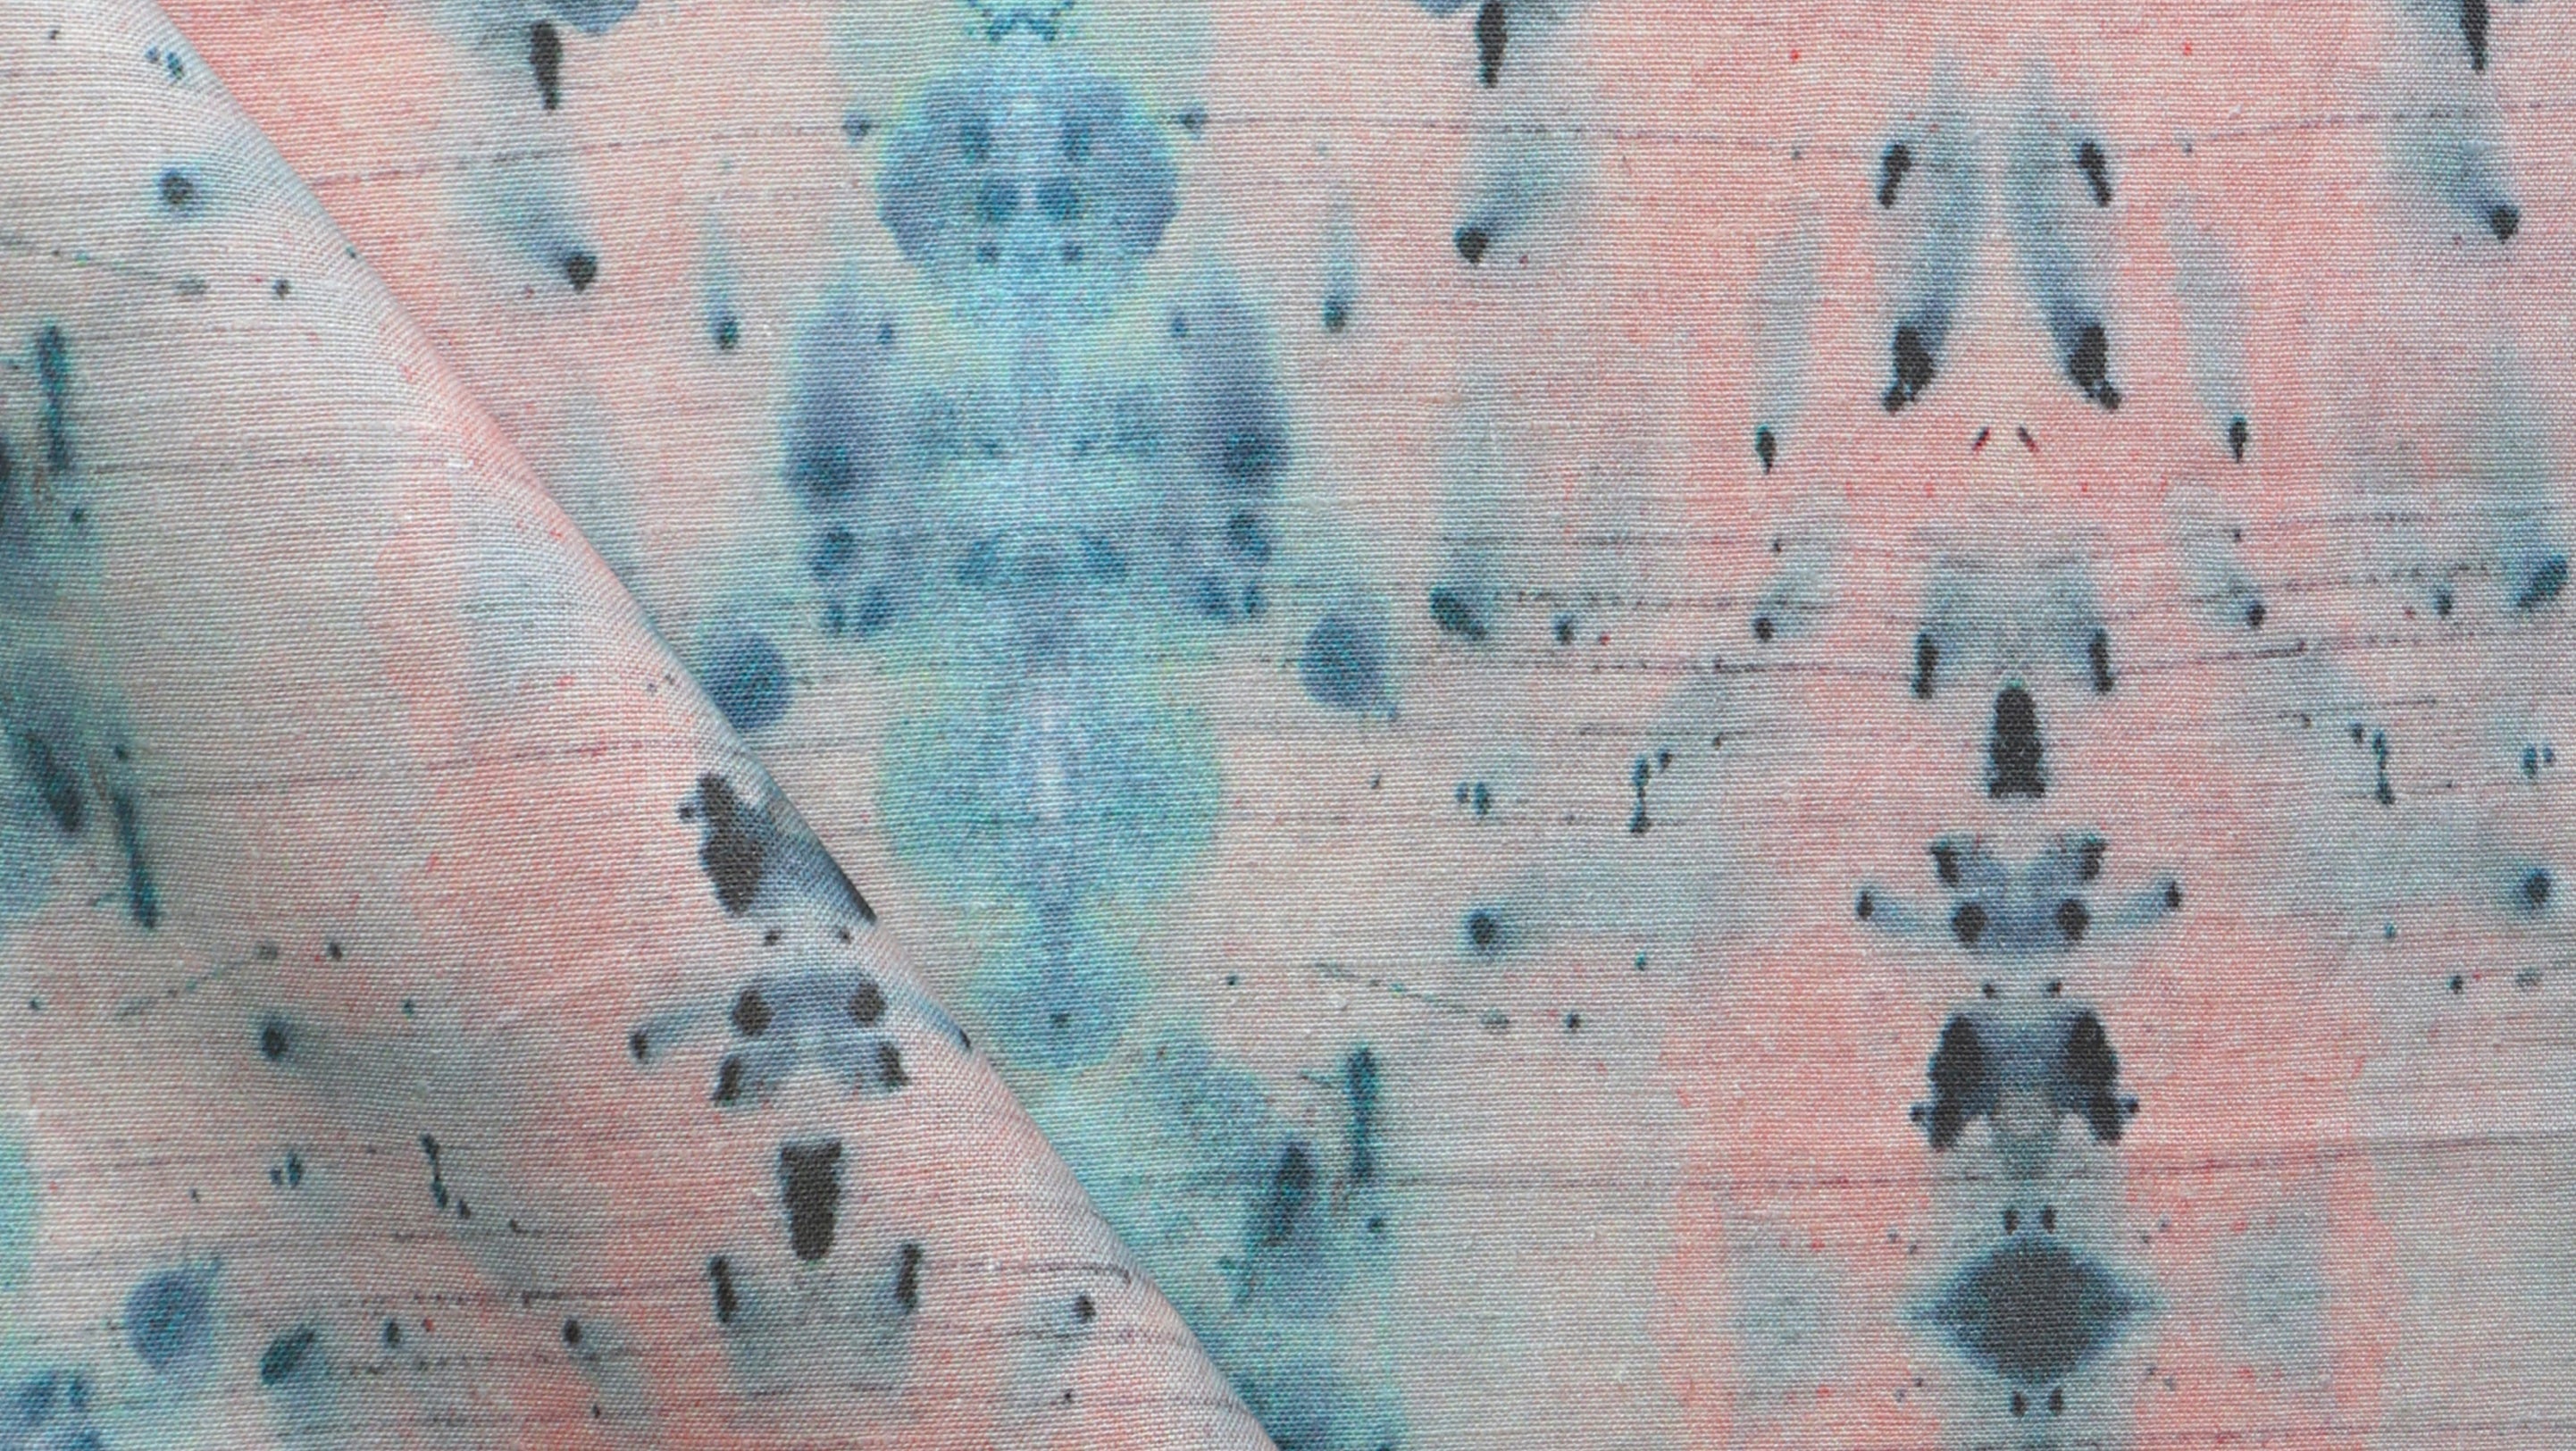 A close up of a pink and blue tie dyed fabric